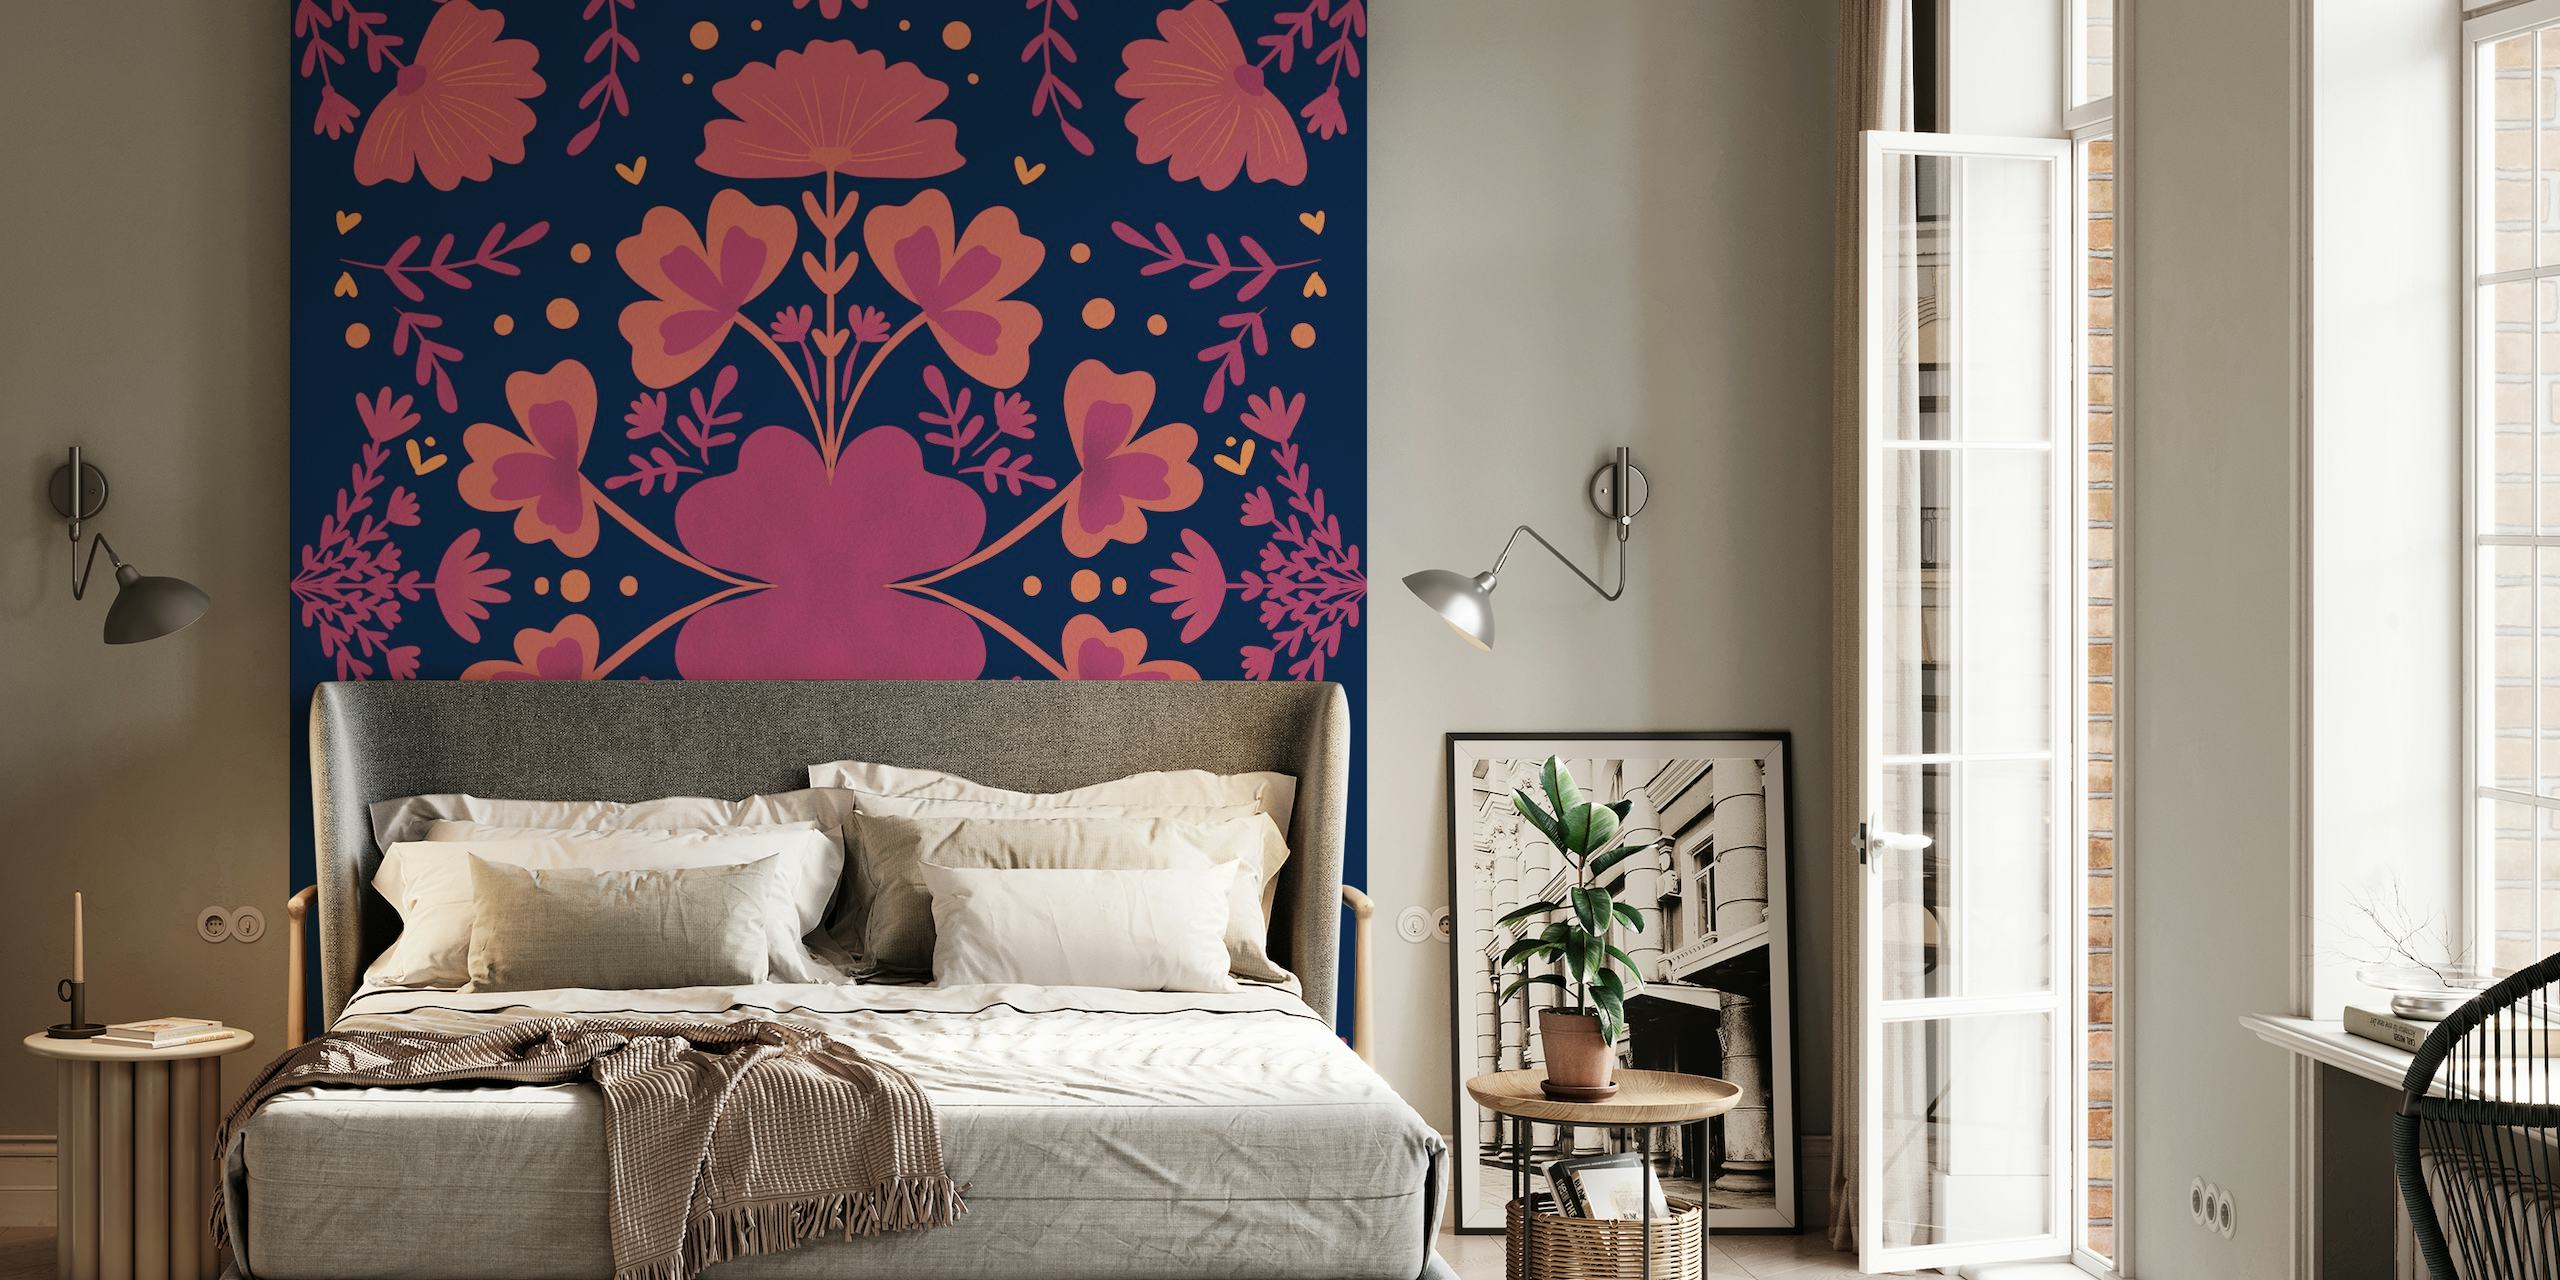 Botanical wall mural with burgundy flowers and clovers on a dark blue background